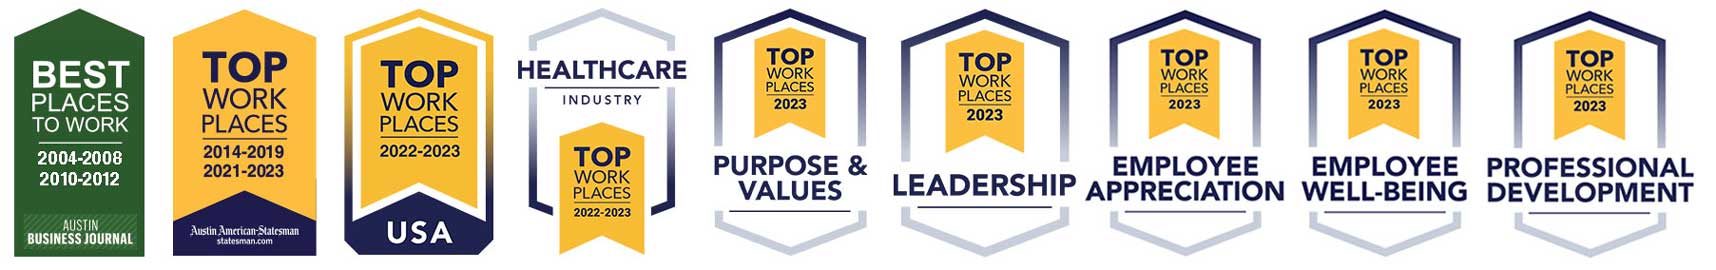 ARC's 6 Top Workplaces Awards from recent years